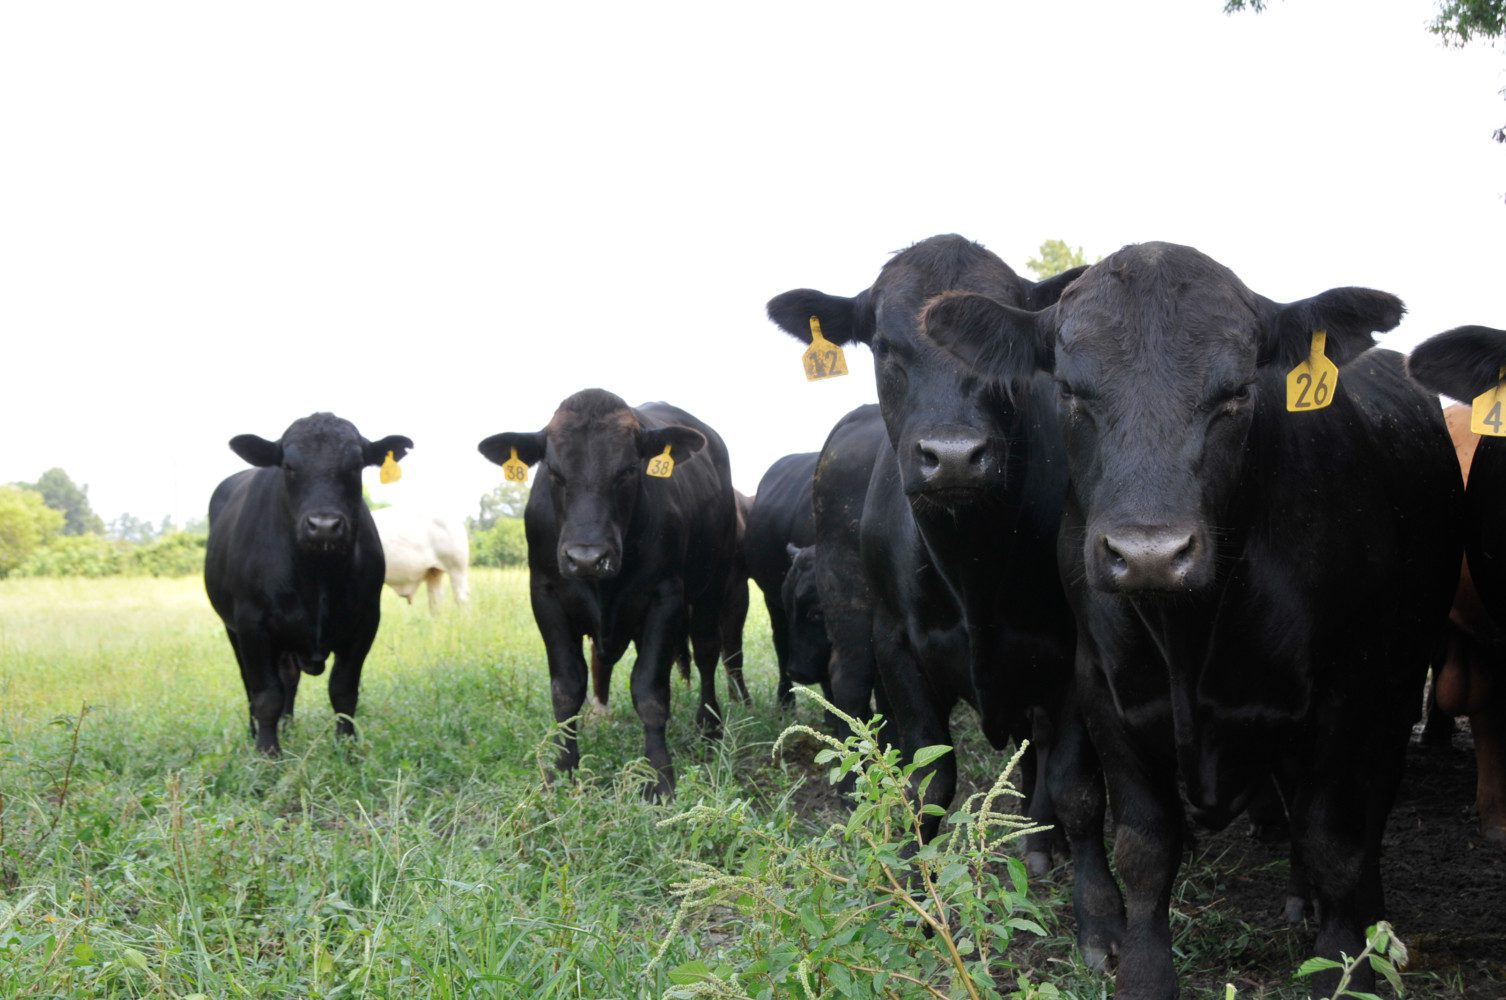 Black cows standing in grass.